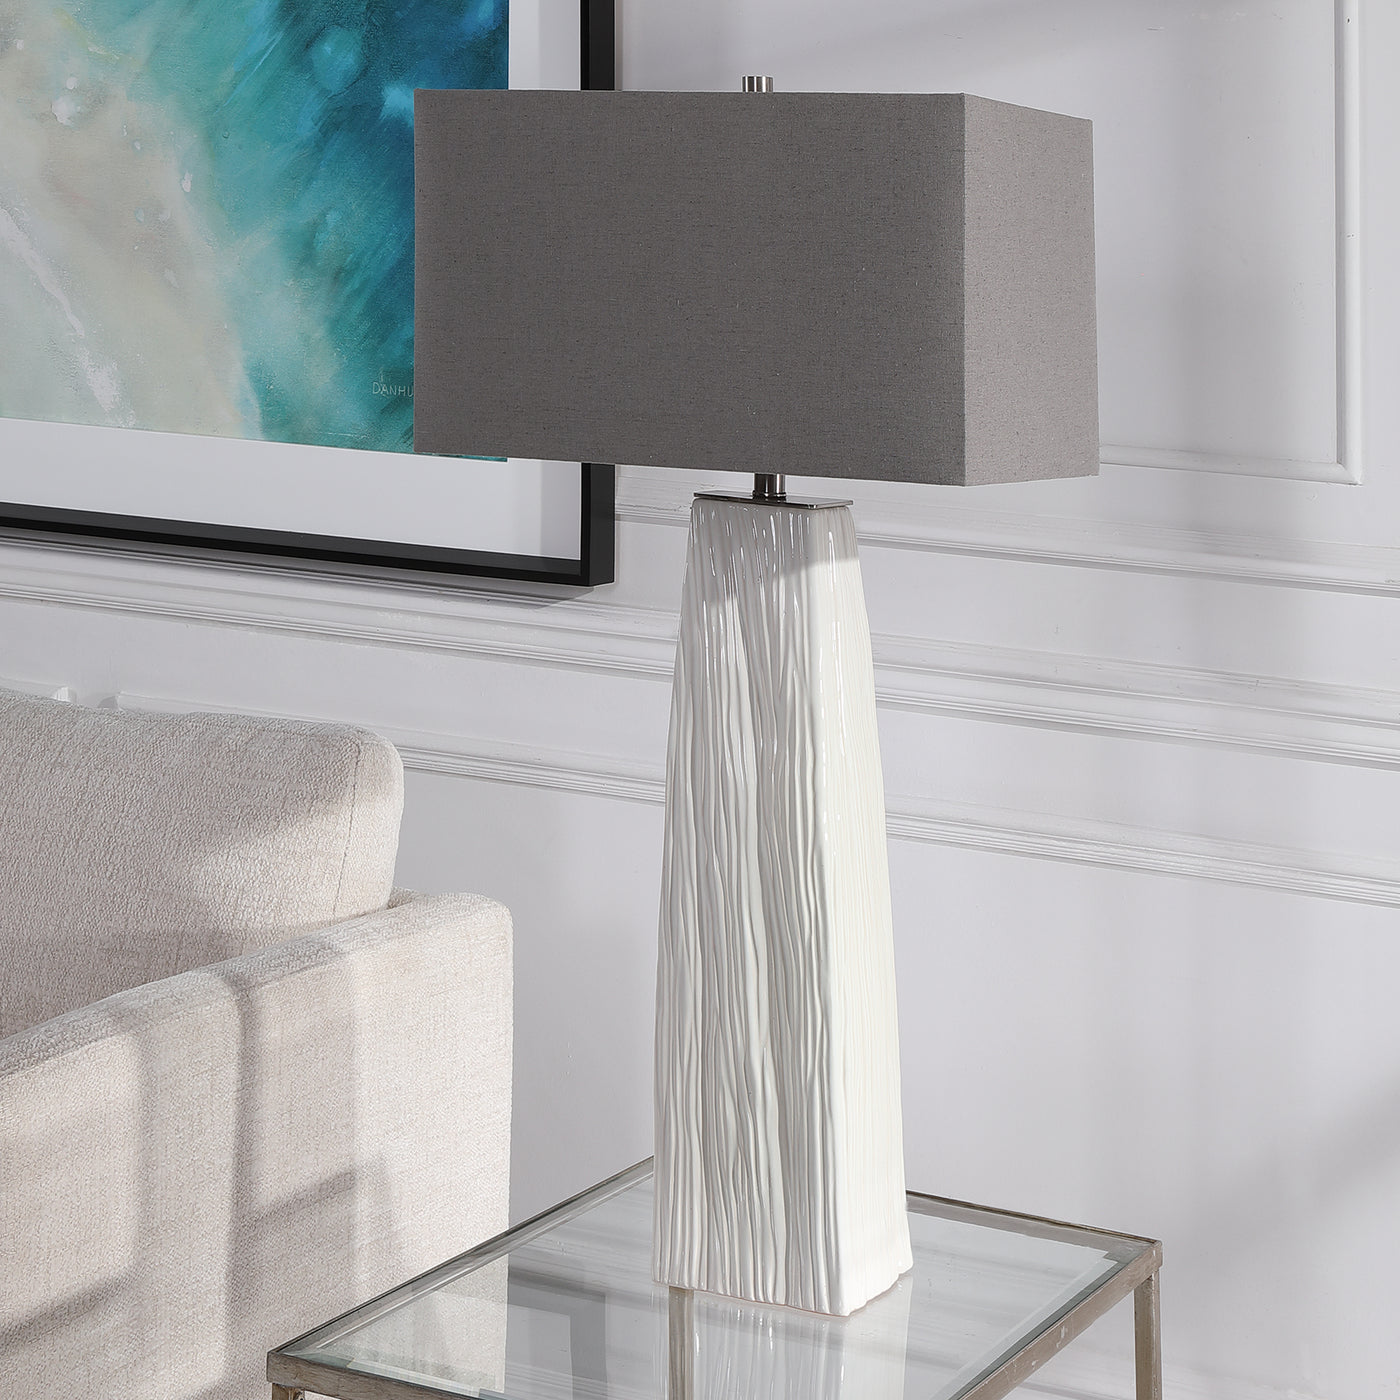 Elegant And Versatile, This Table Lamp Features A Gloss White Ceramic Base Featuring Organic Hand Carved Details And Brush...